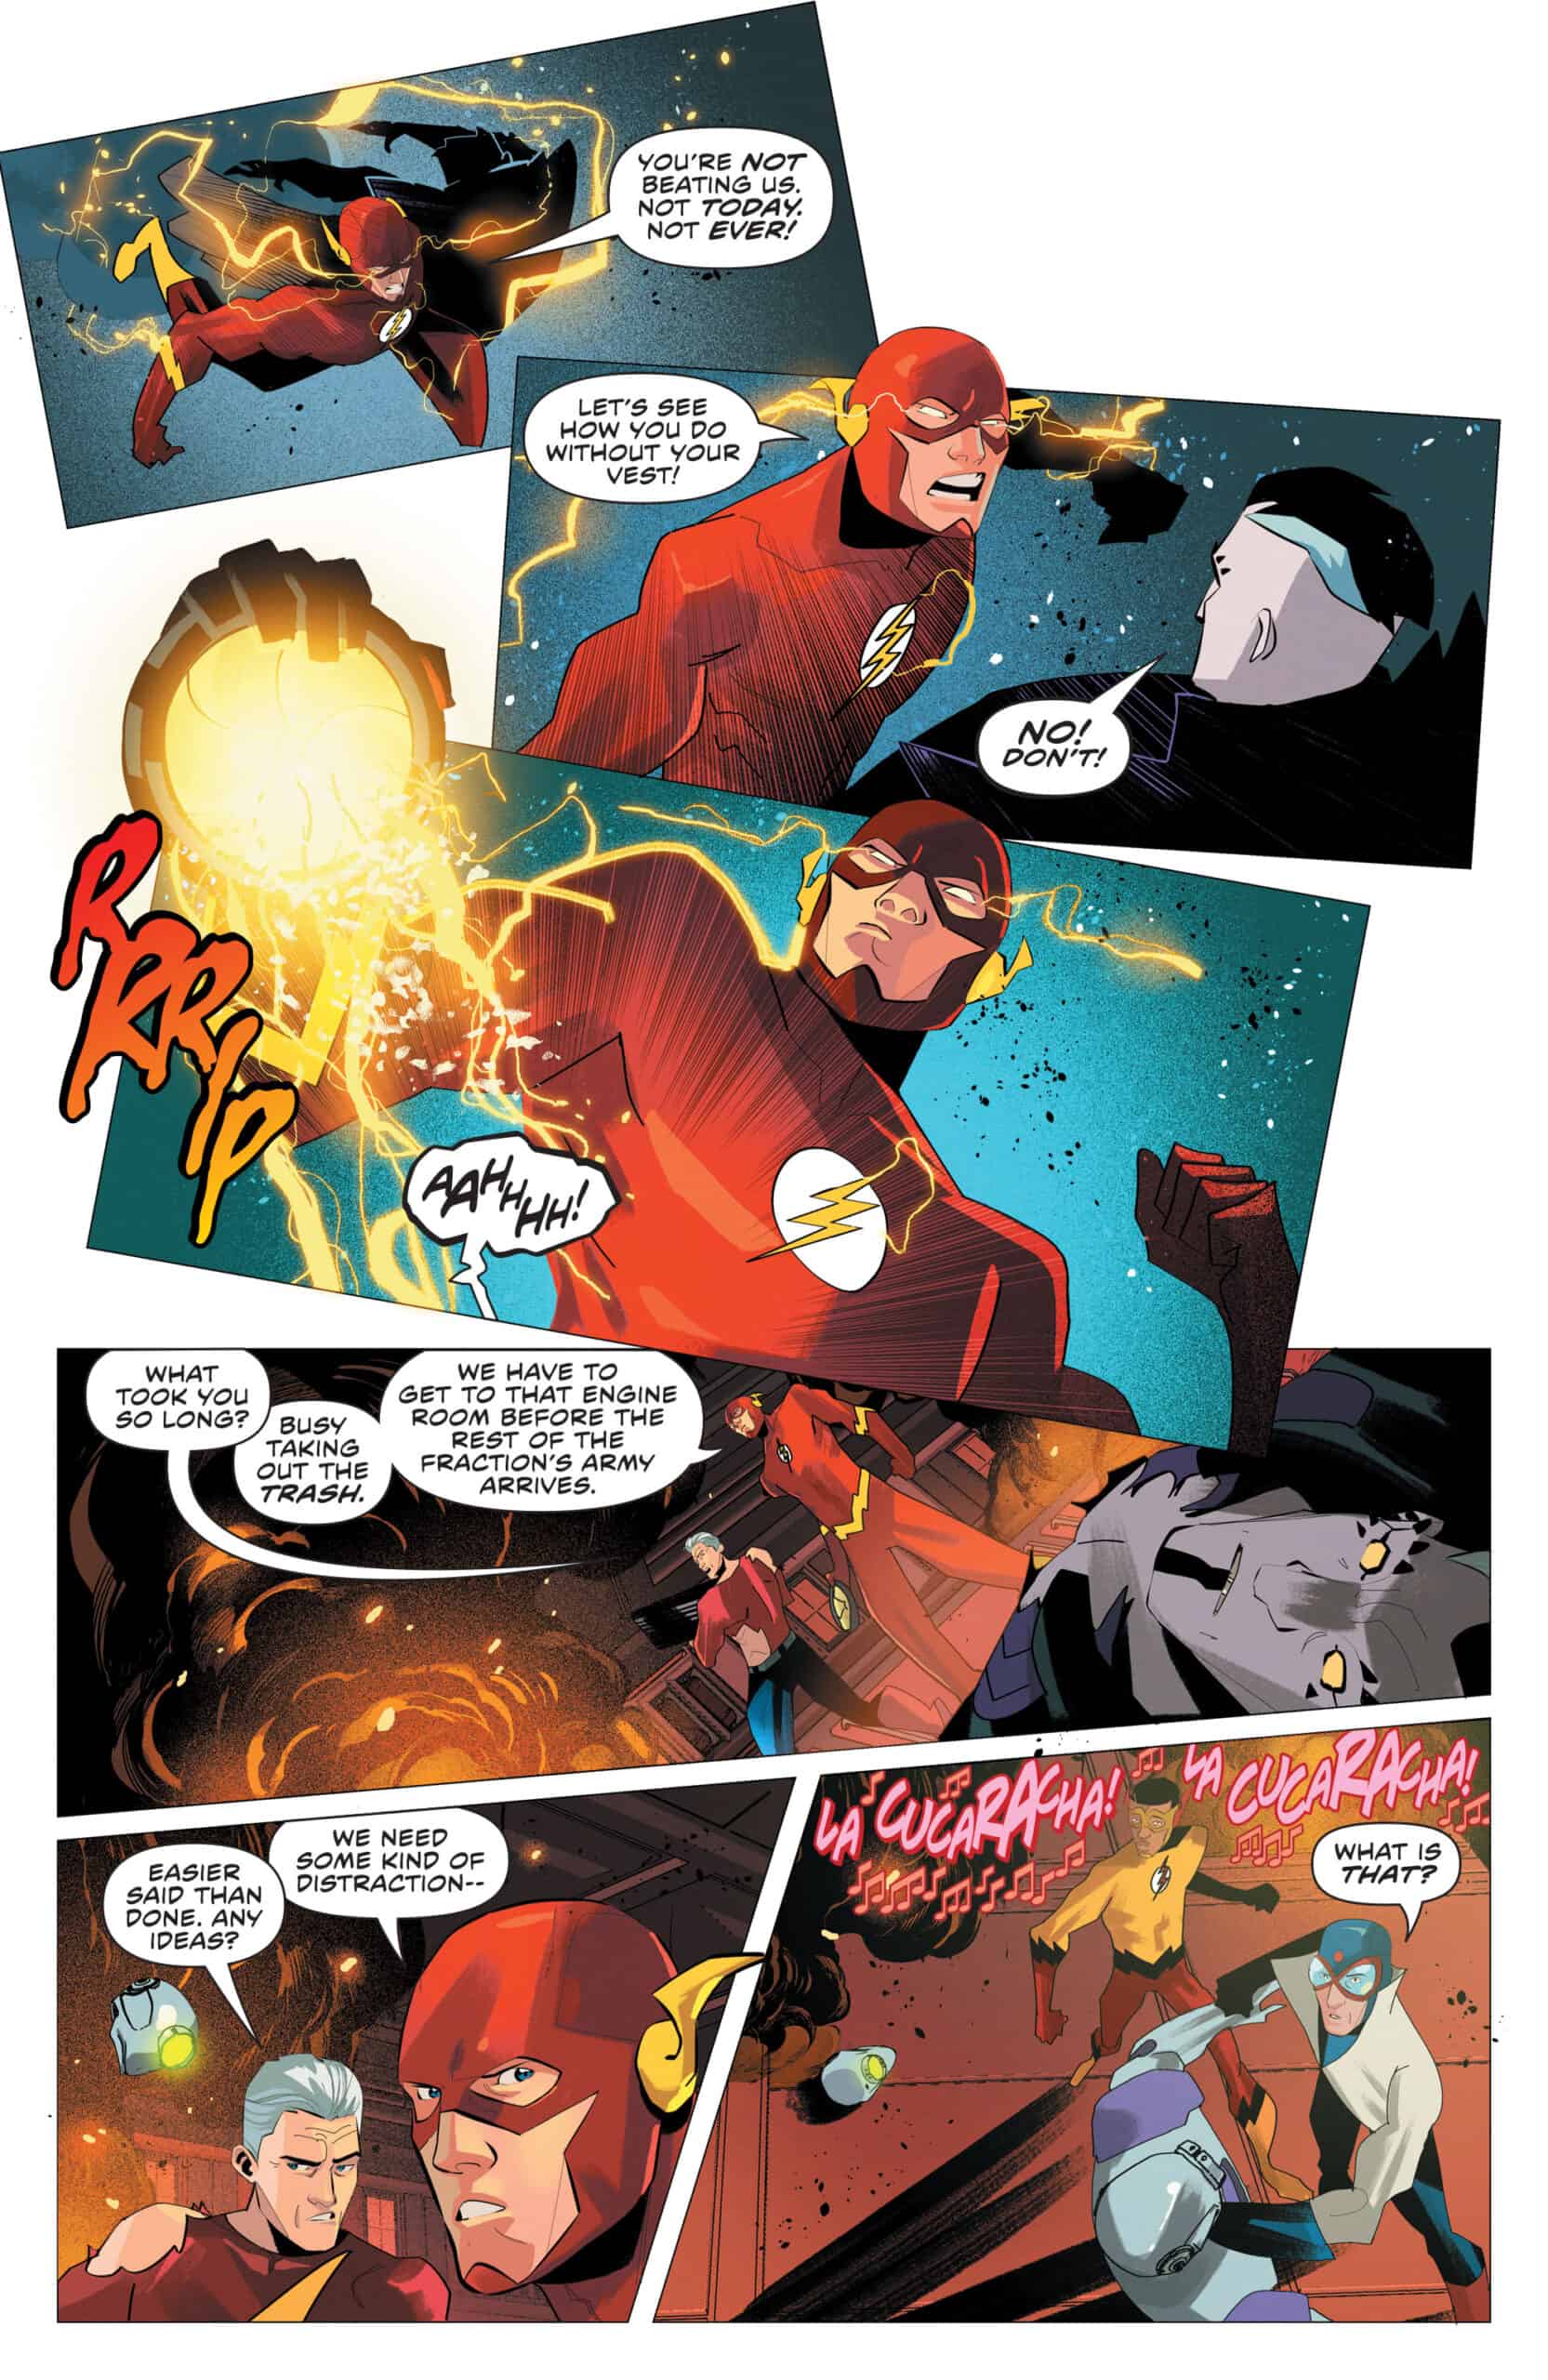 The One-Minute-War Reaches Its Finale in The Flash #796 - Comic Watch